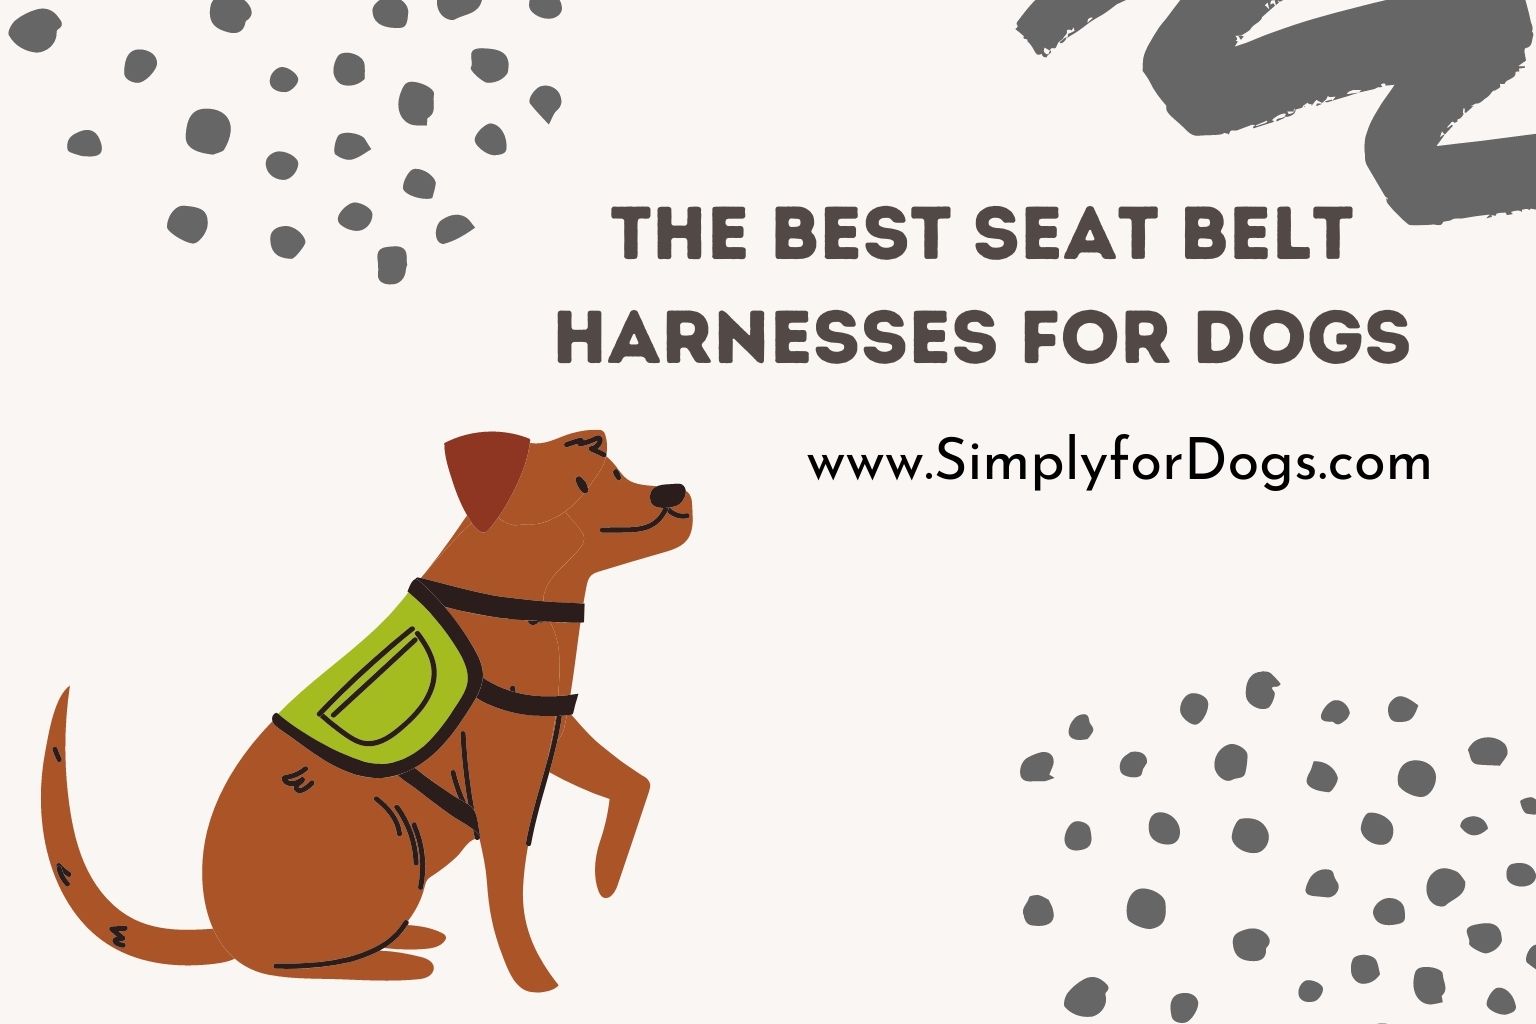 The Best Seat Belt Harnesses for Dogs